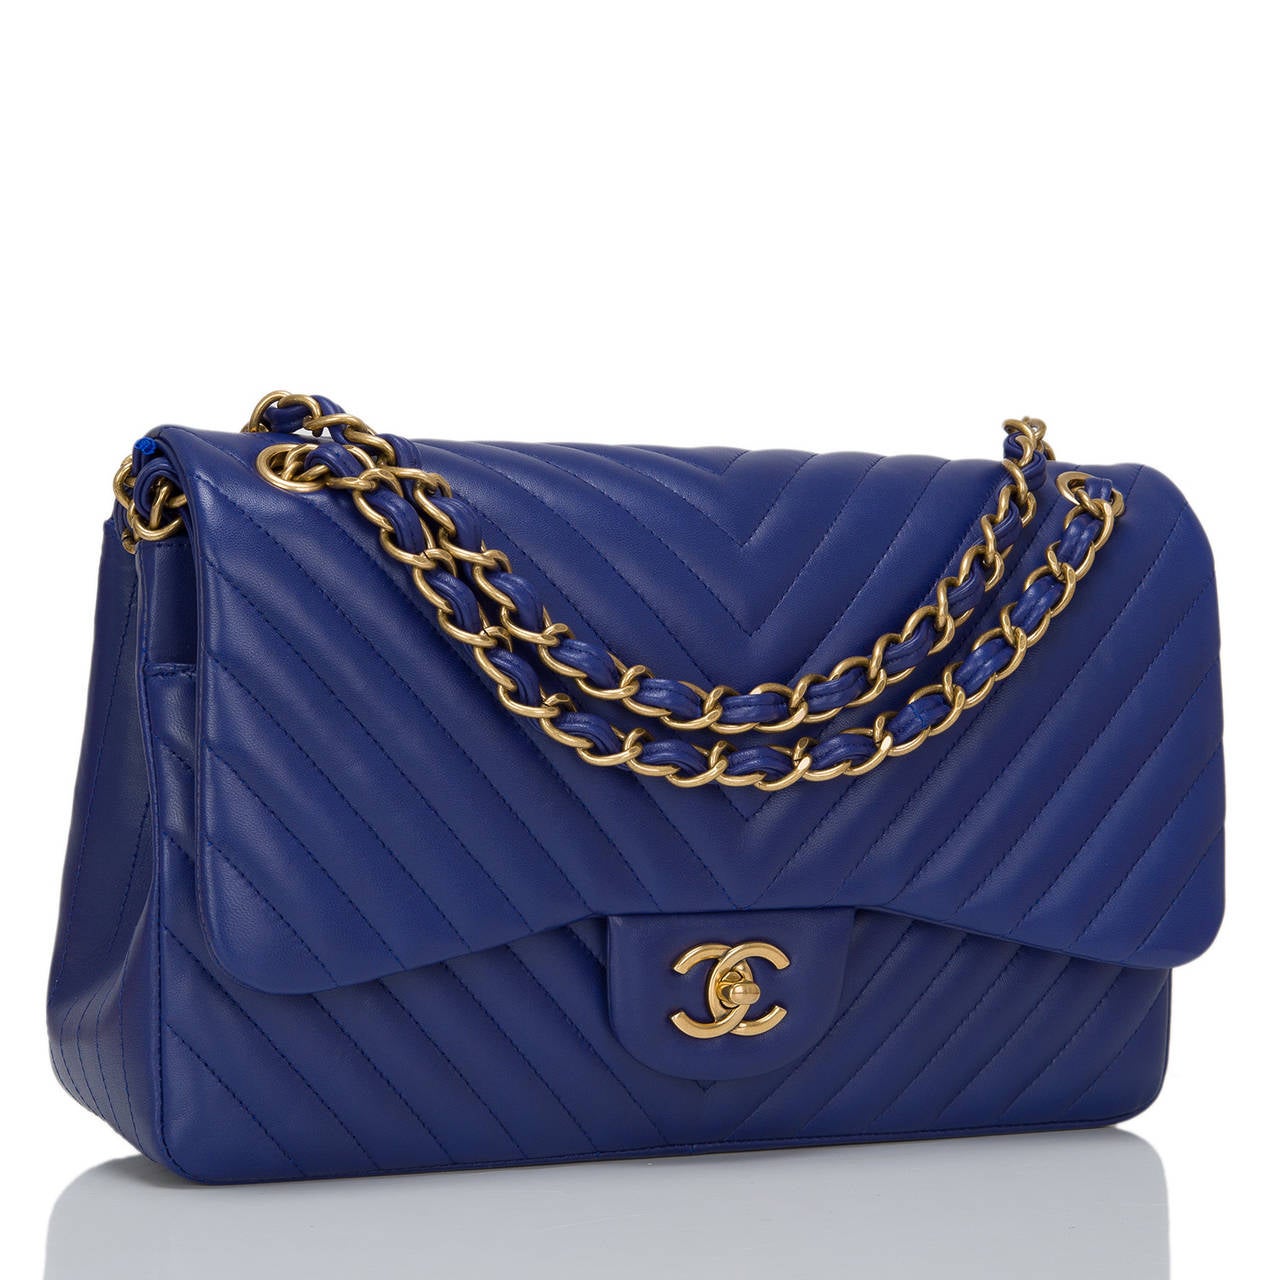 This limited edition Chanel Blue Chevron Jumble double flap bag in quilted lambskin leather and aged gold tone hardware is an edgy take on the iconic Chanel Classic bag. It features a front flap with signature CC turnlock closure, half moon back